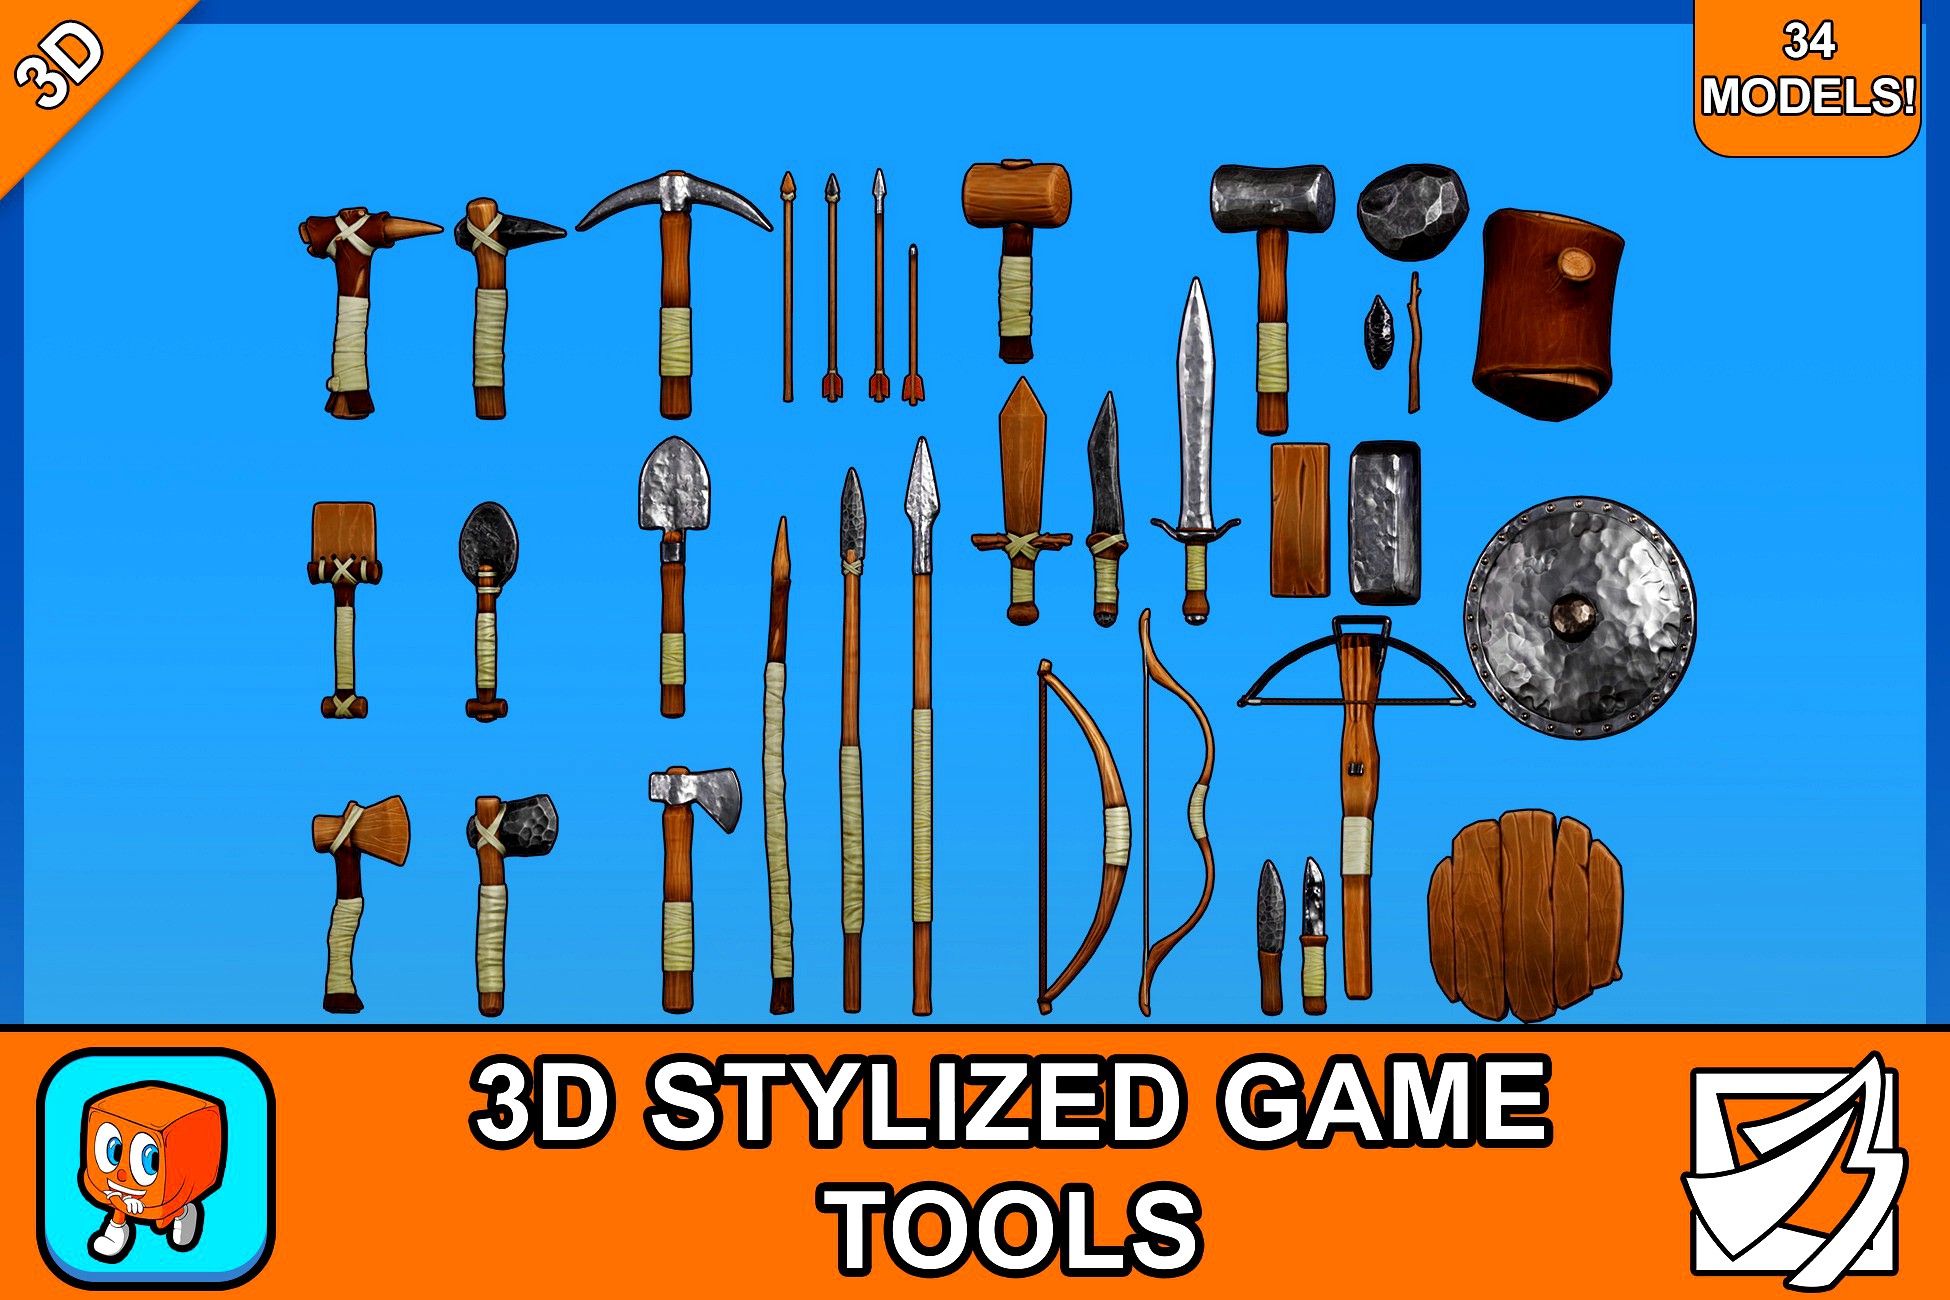 3D Stylized RPG/Survival Game Tools